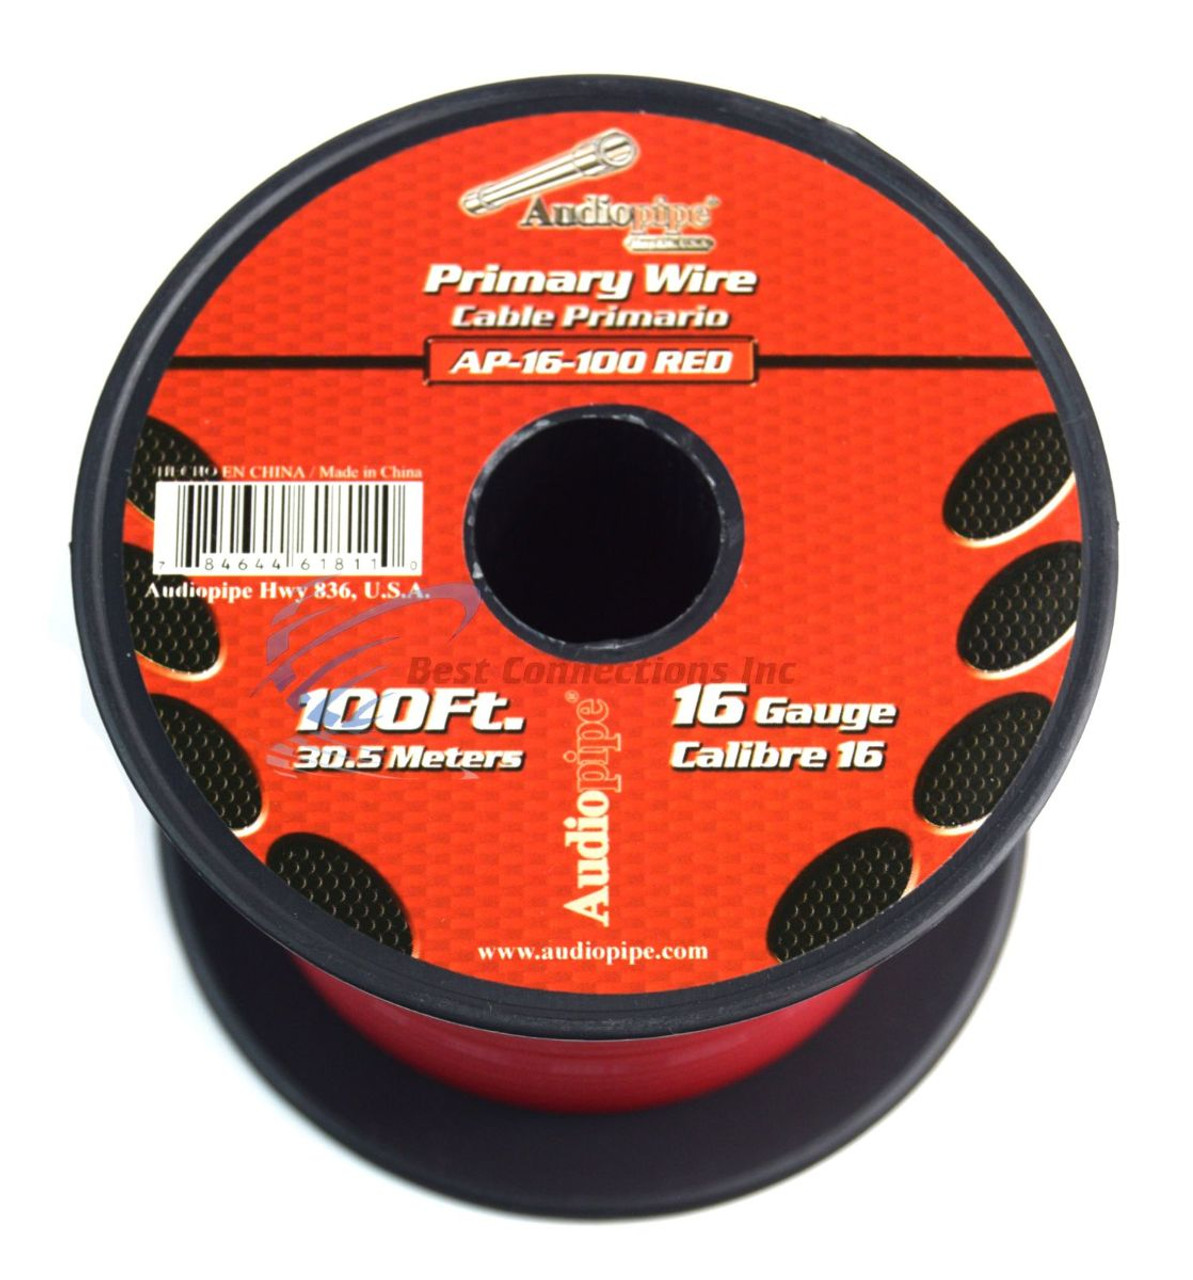 6 Rolls 16 Gauge 100' Feet Single Conductor Stranded Remote Wire 600' Total  - Best Connections